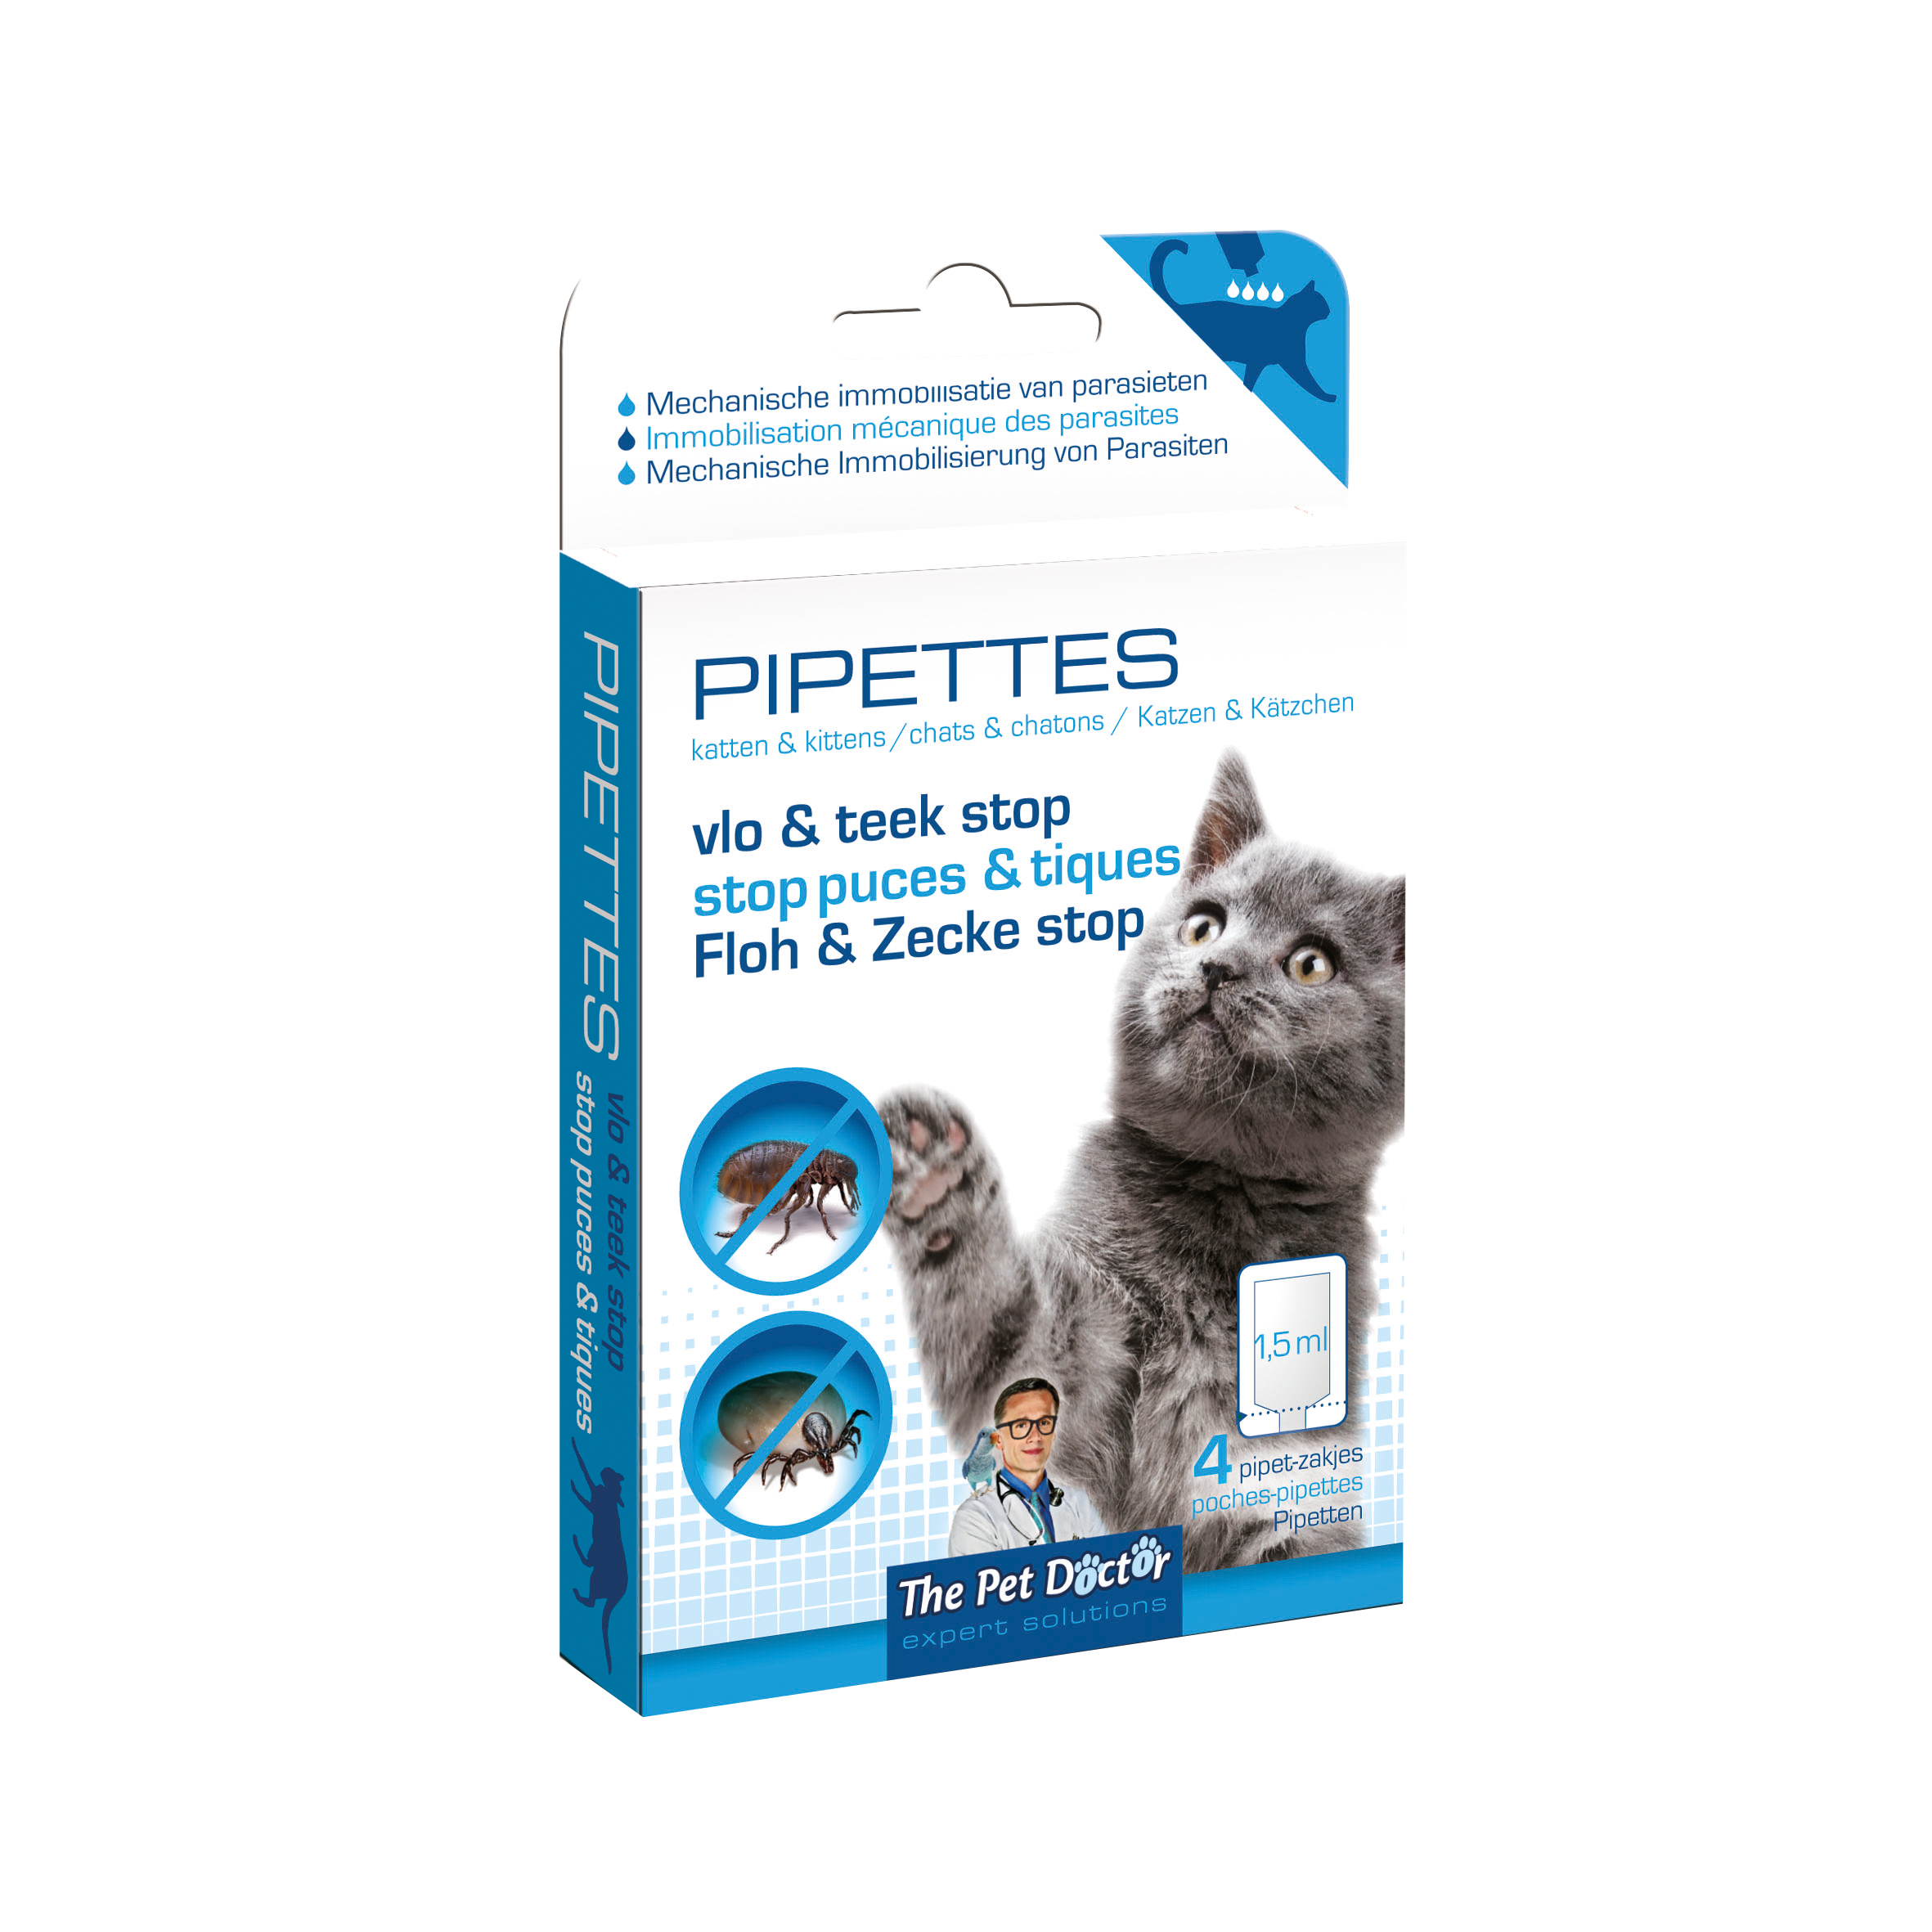 The Pet Doctor Vlo & Teek Stop Pipettes Kat image